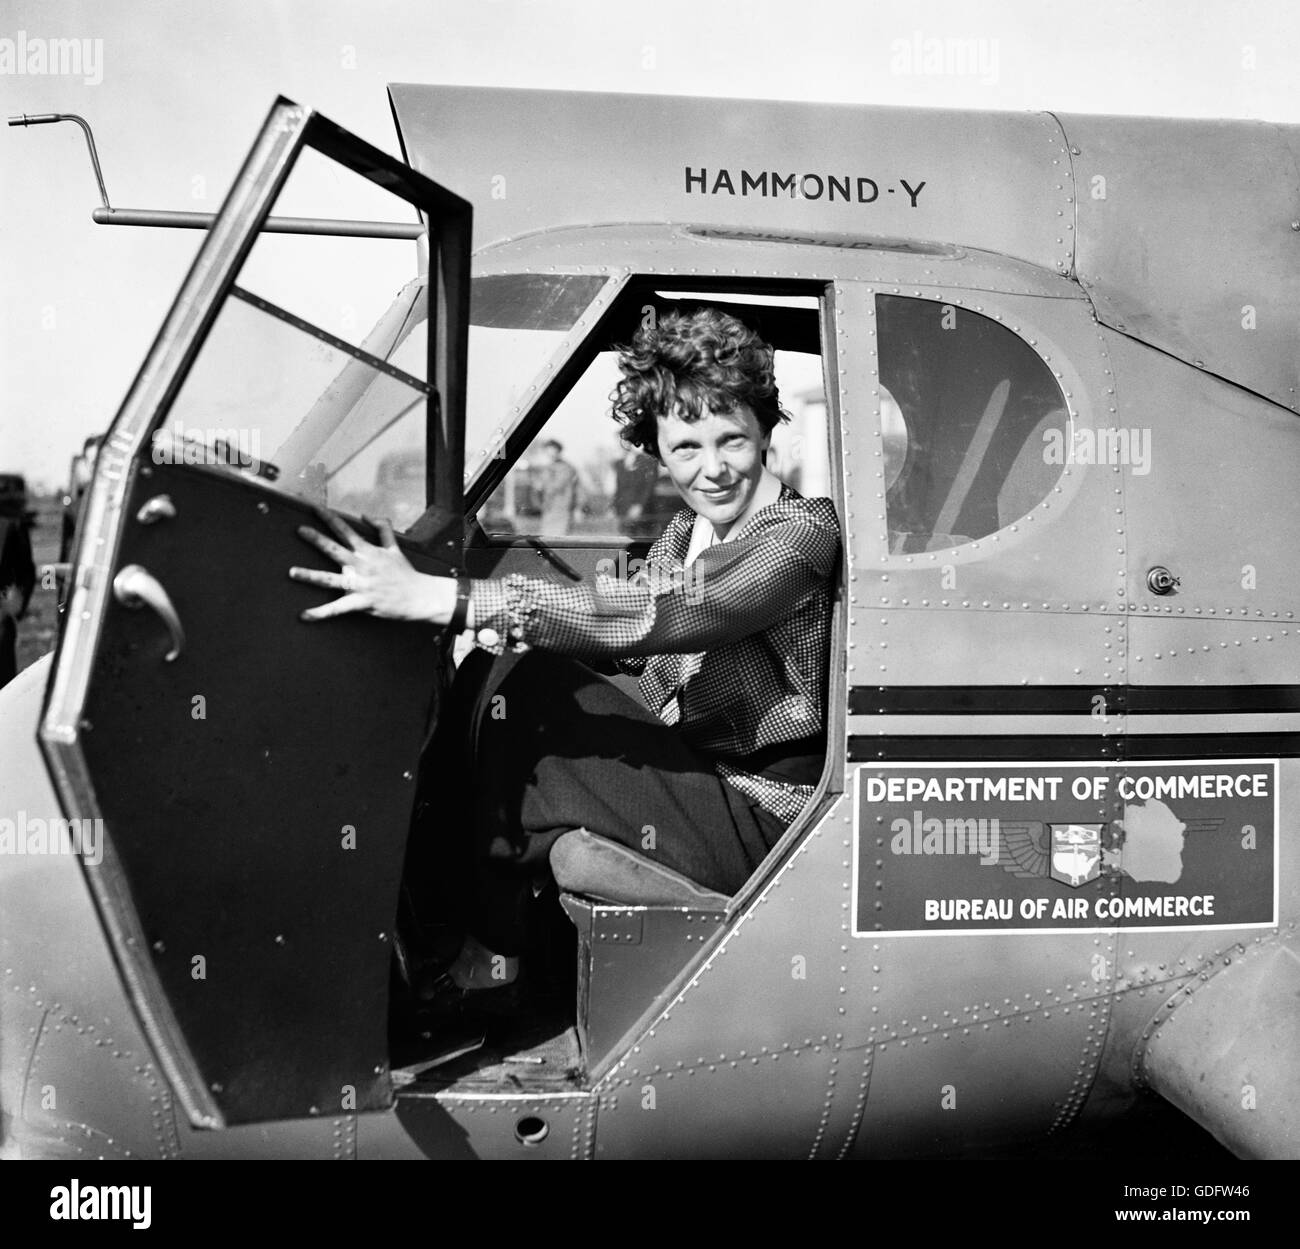 Amelia Earhart (1897-1937) in the cockpit of an airplane c.1936. Photo by Harris and Ewing. Stock Photo